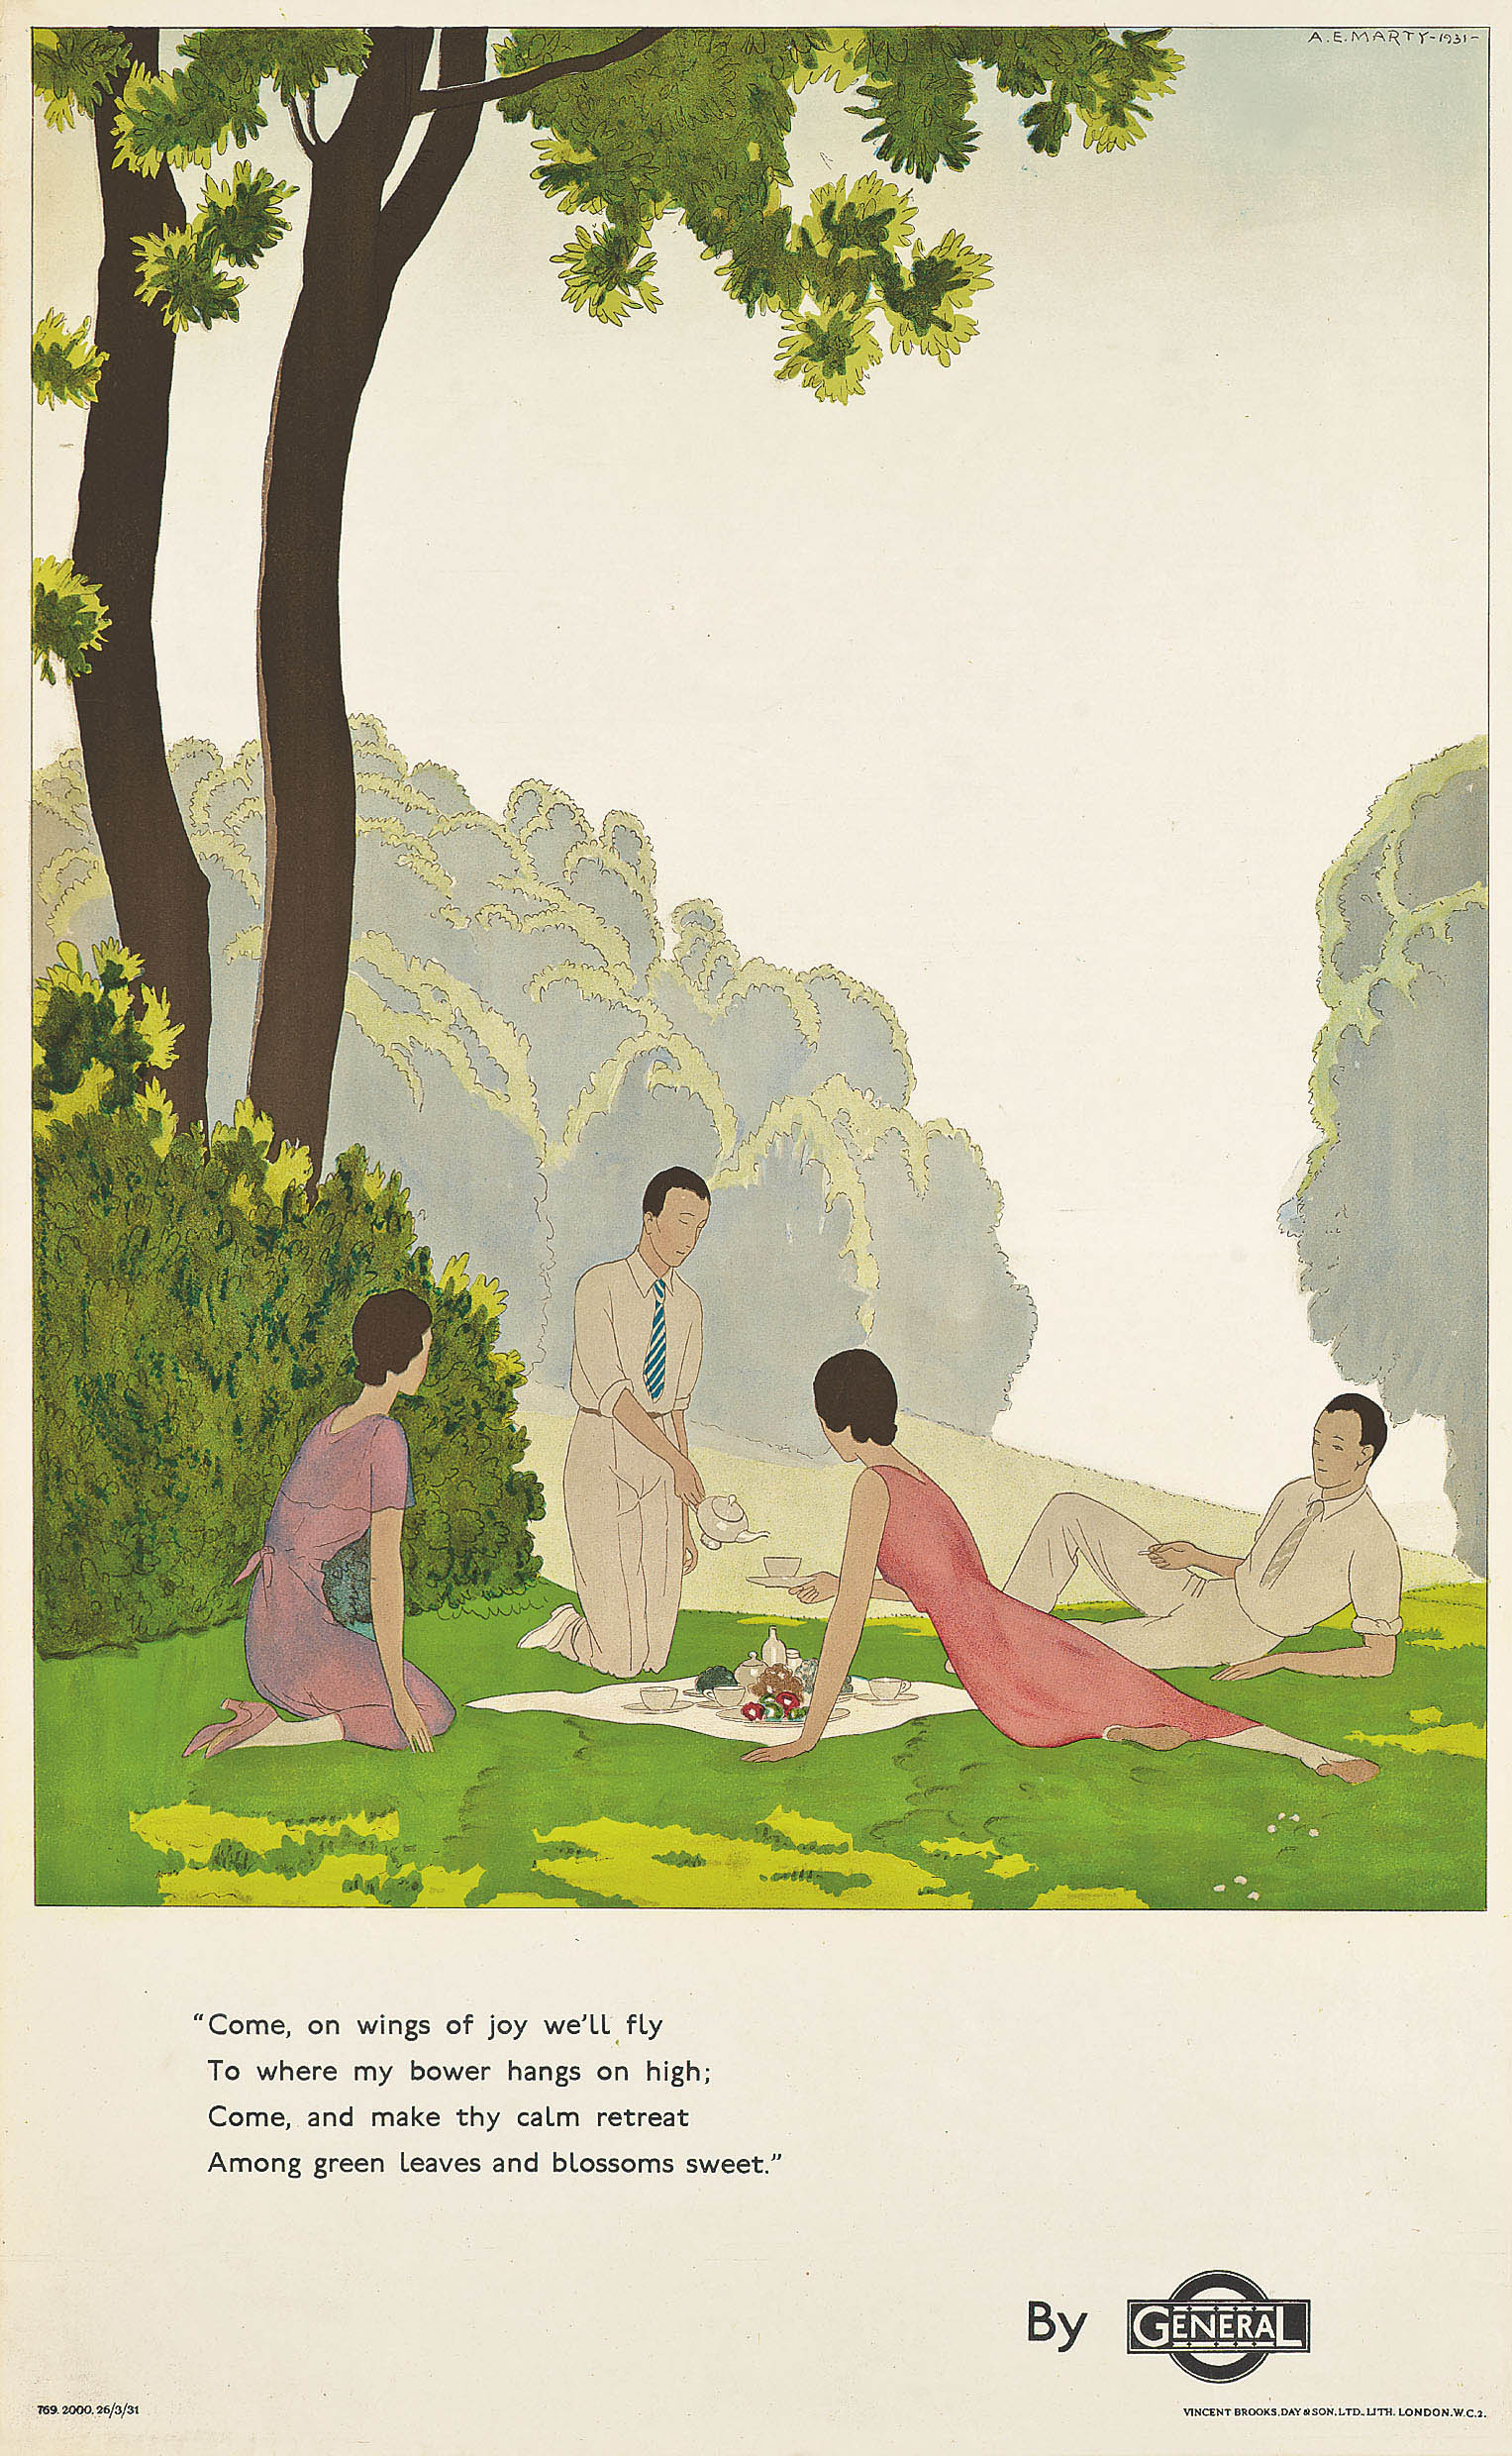 illustrational poster of friends having a picnic in the lush outdoors